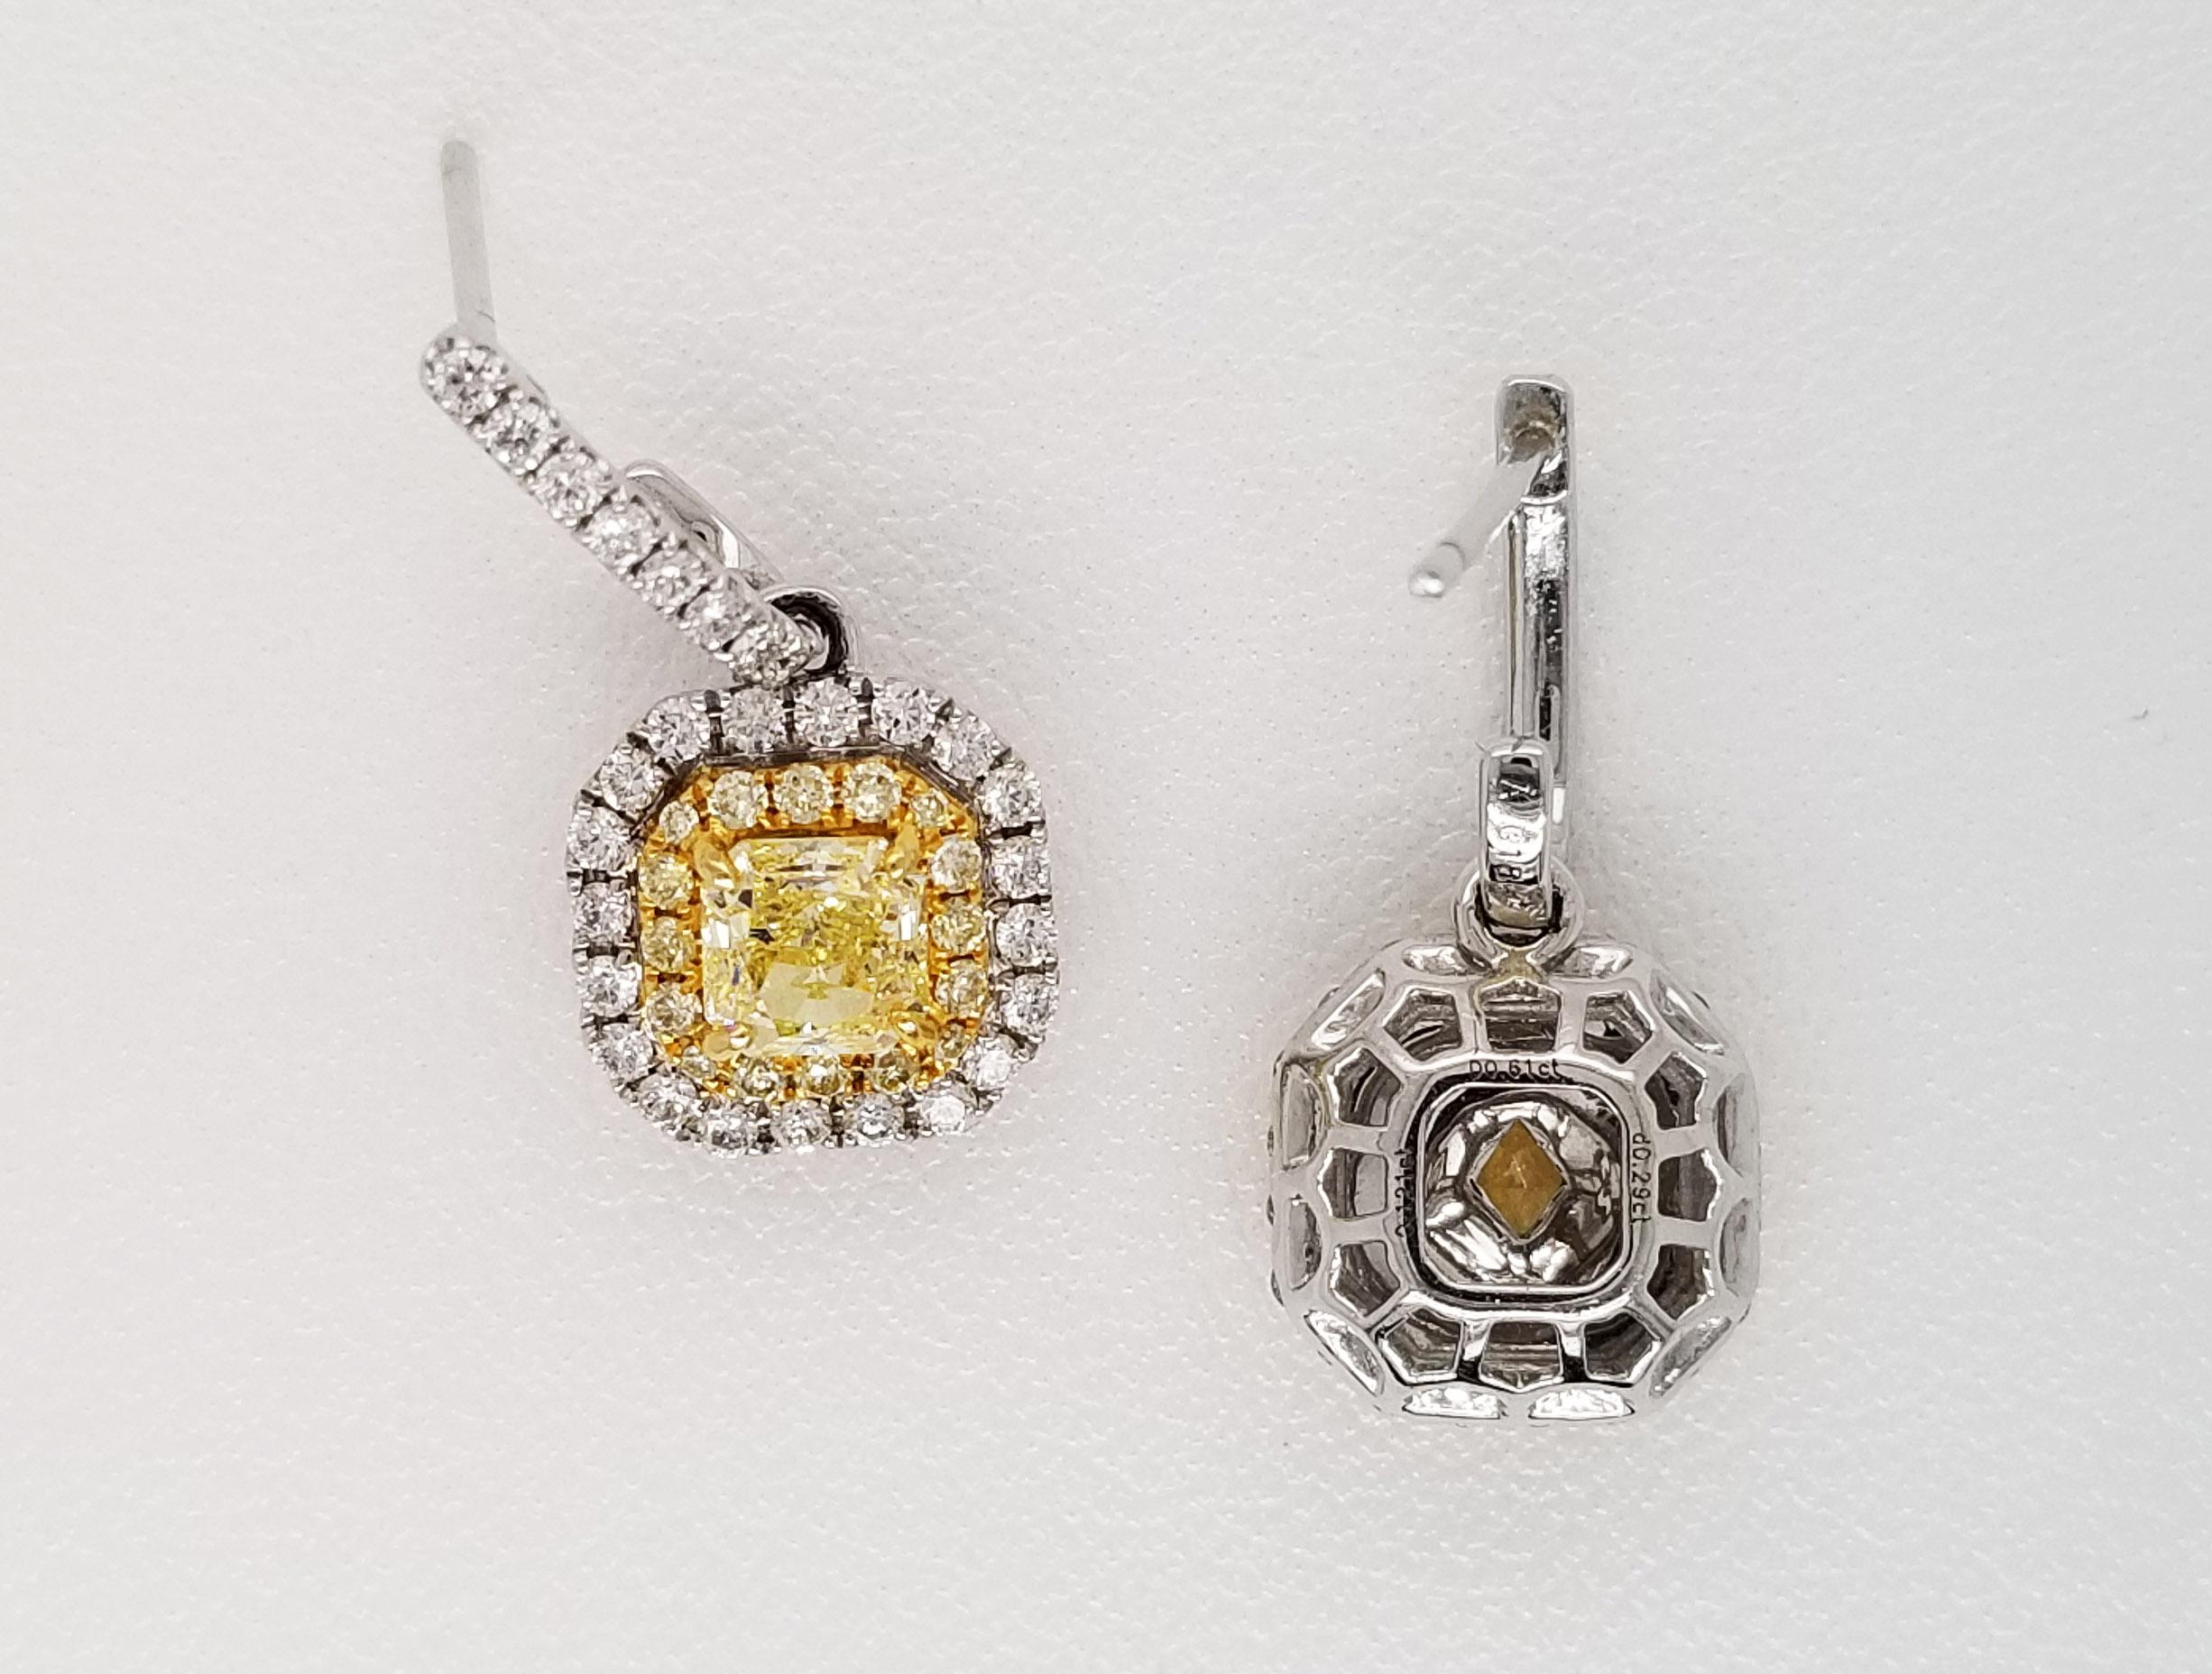 Contemporary Scarselli Dangle Earrings in Platinum Fancy Yellow Diamonds 0.5 Each, GIA For Sale